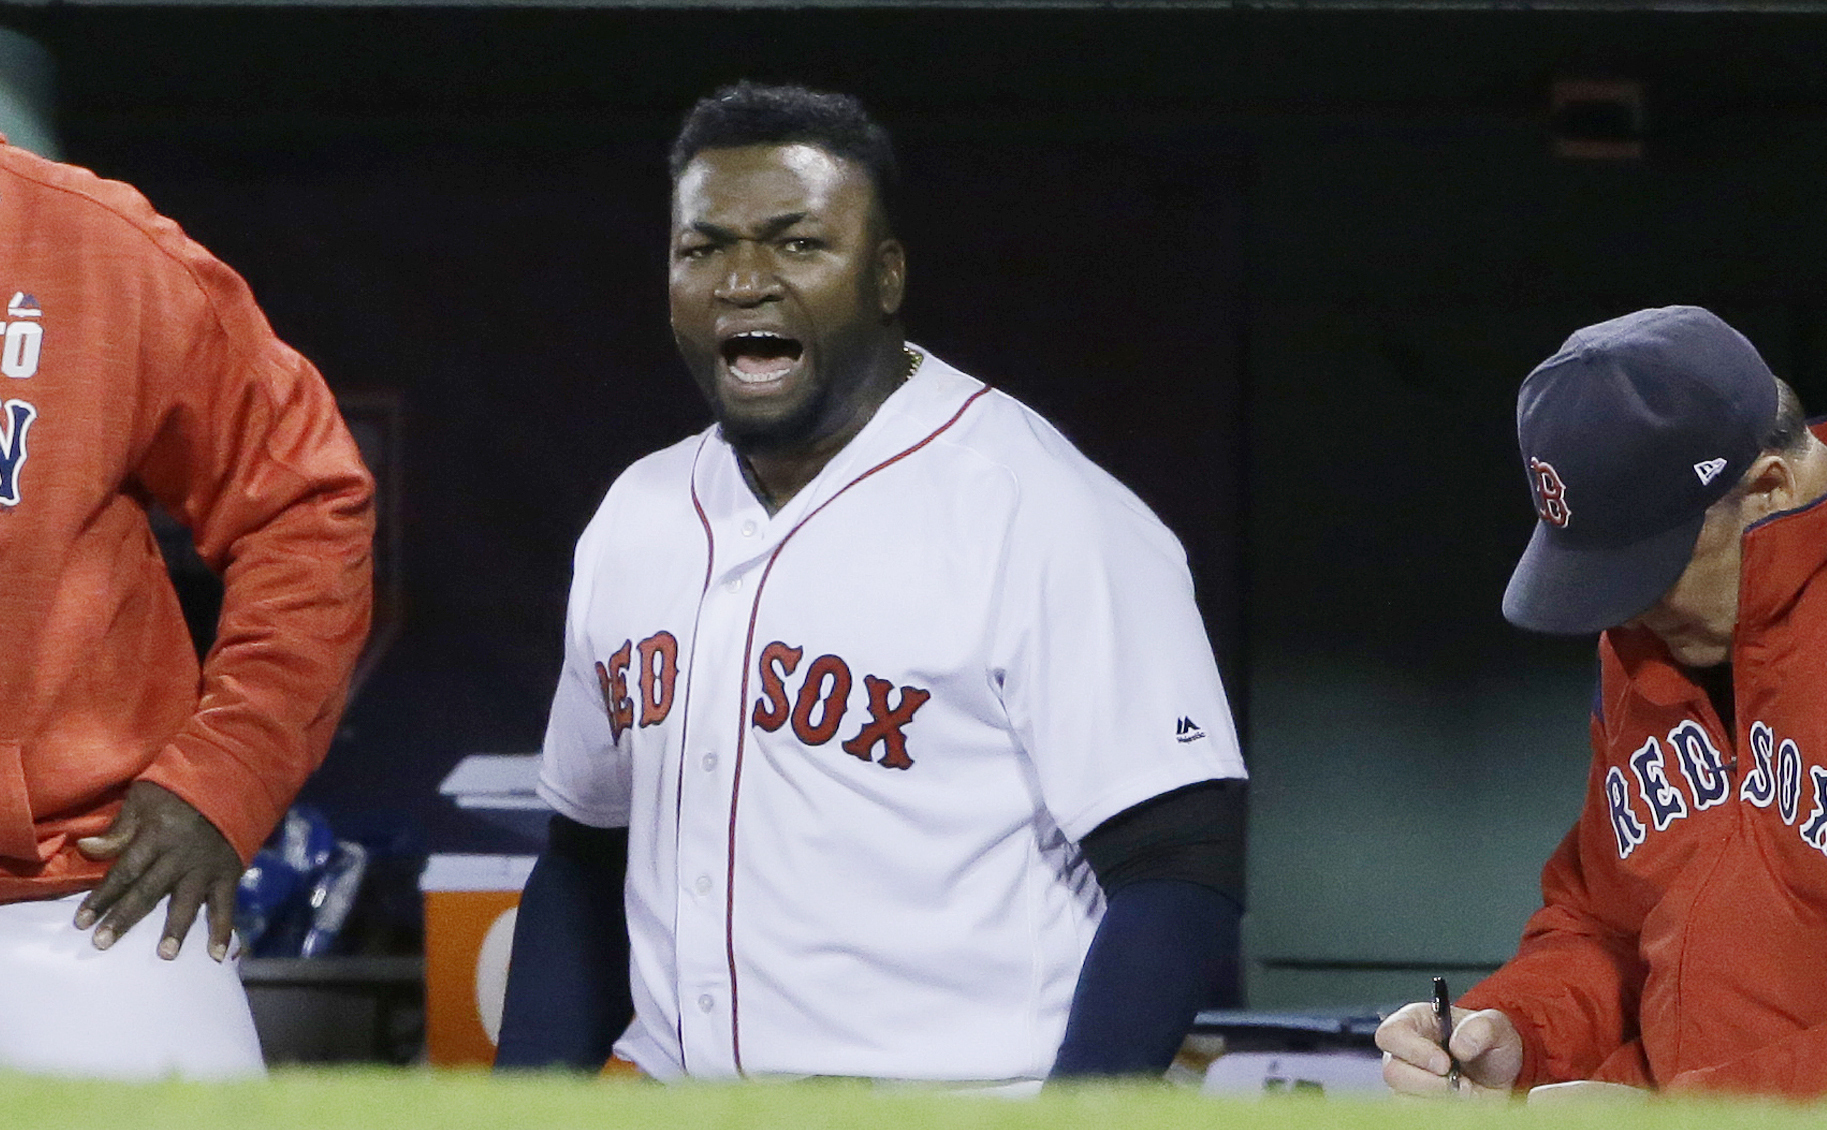 David Ortiz: From A Dominican Upbringing To 3-Time World Series Champion